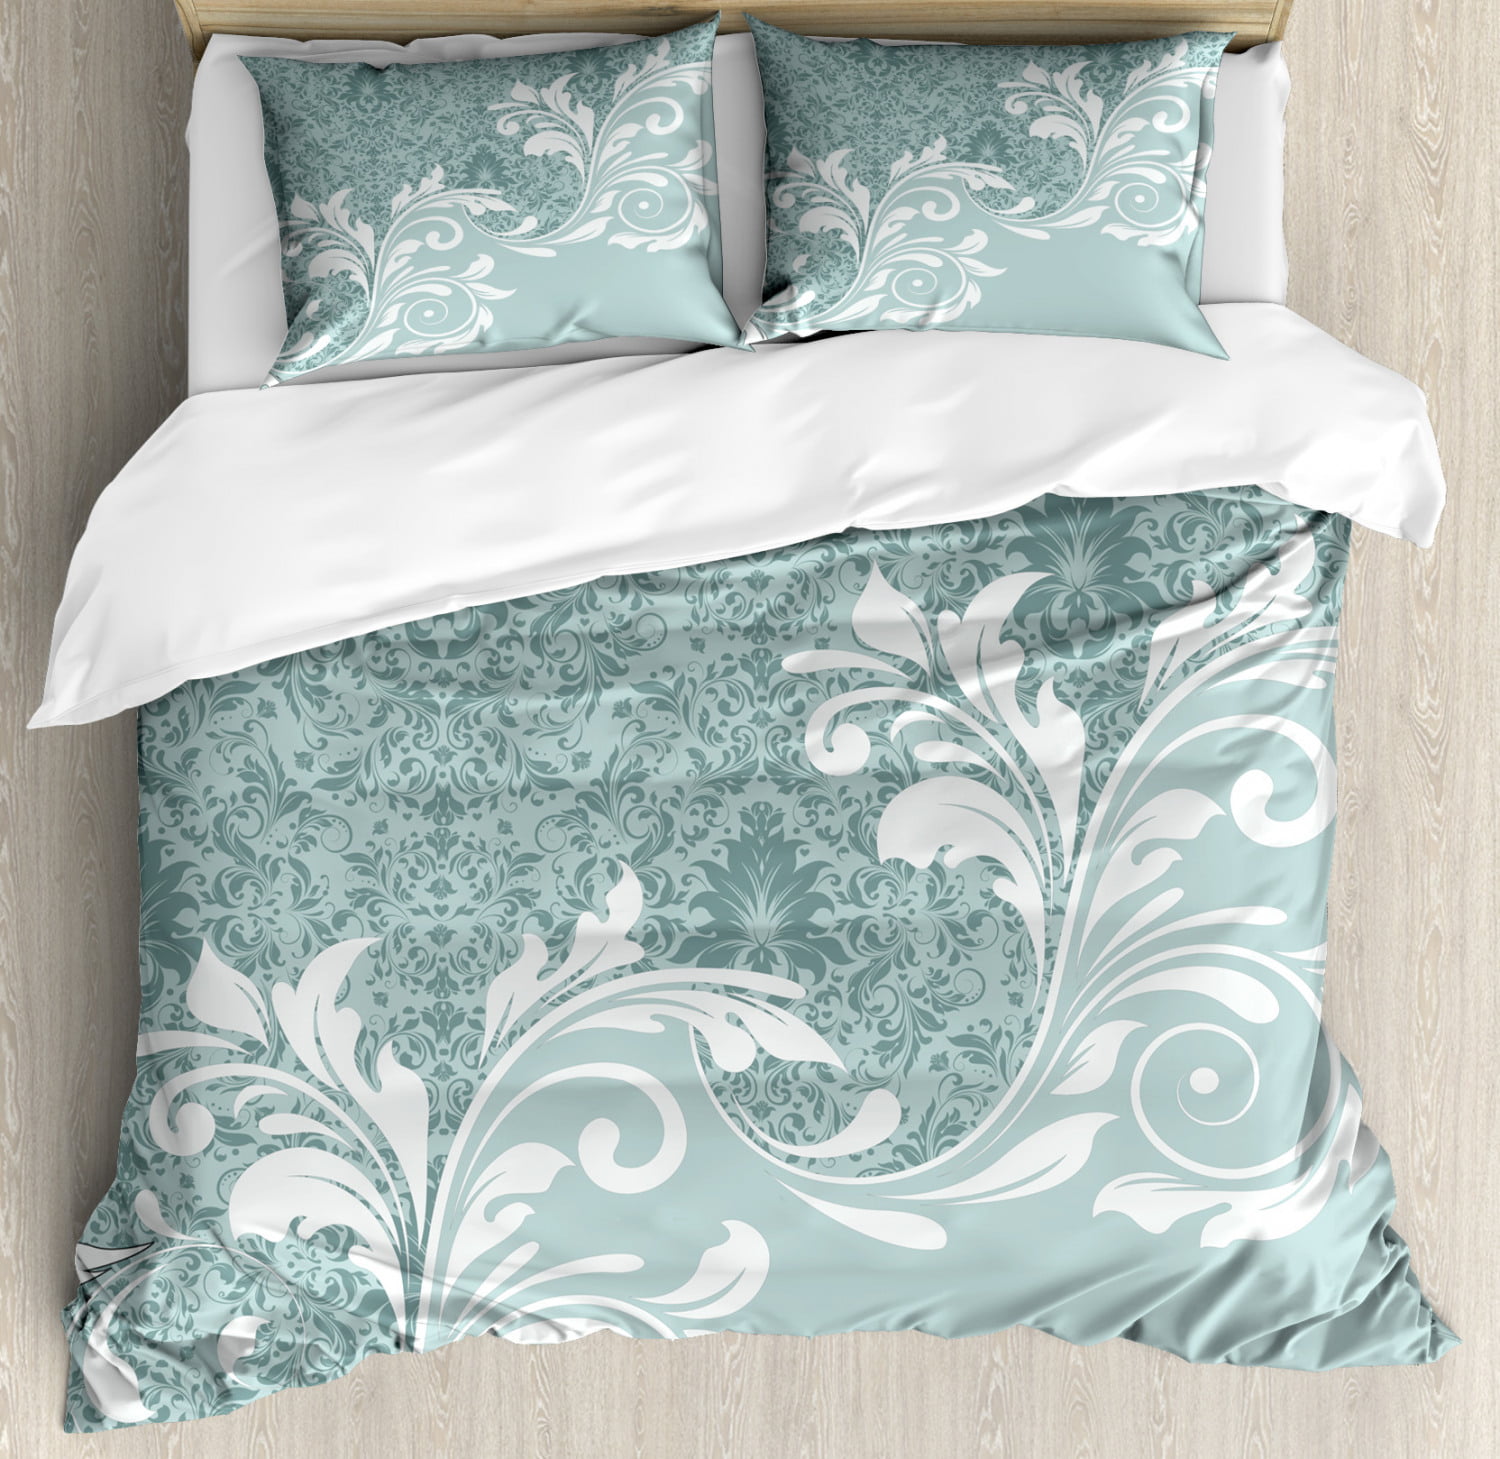 Vintage Duvet Cover Set Retro Floral Ivy Leaves With Swirls Abstract Vector Artwork Decorative Bedding Set With Pillow Shams Baby Blue White Slate Blue By Ambesonne Walmart Com Walmart Com